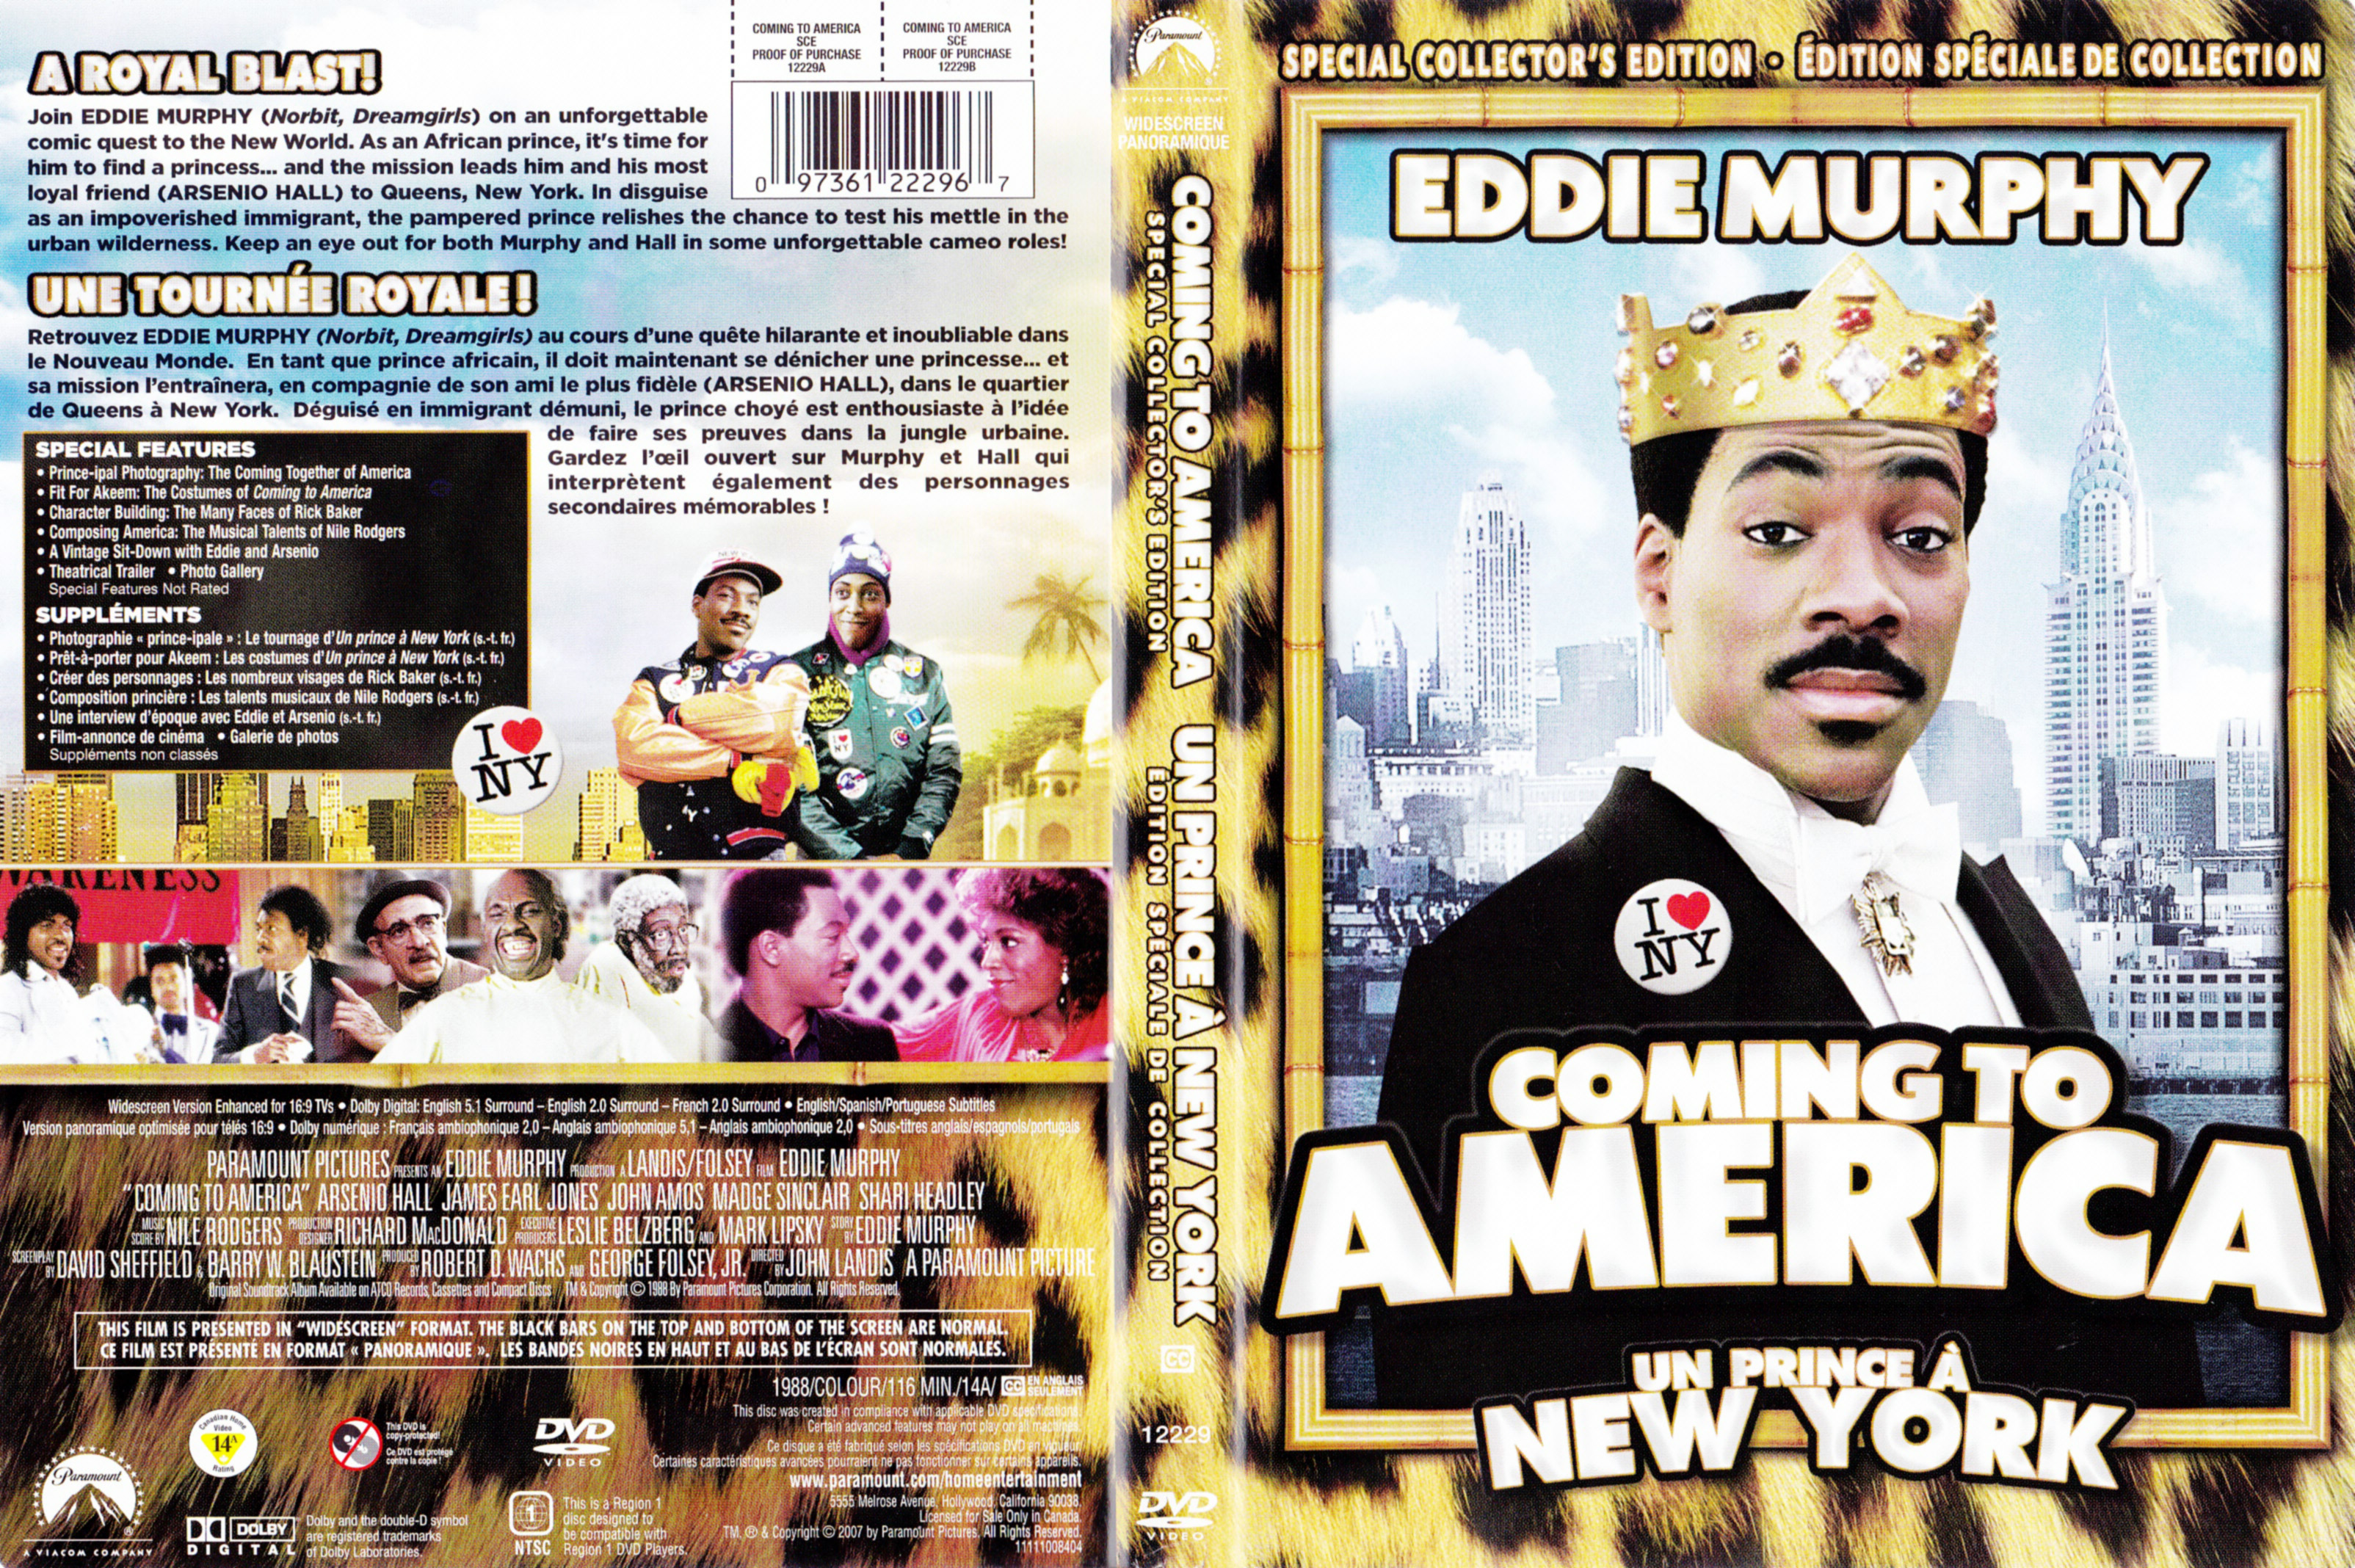 Jaquette DVD Un prince a New York - Coming to america (Canadienne)